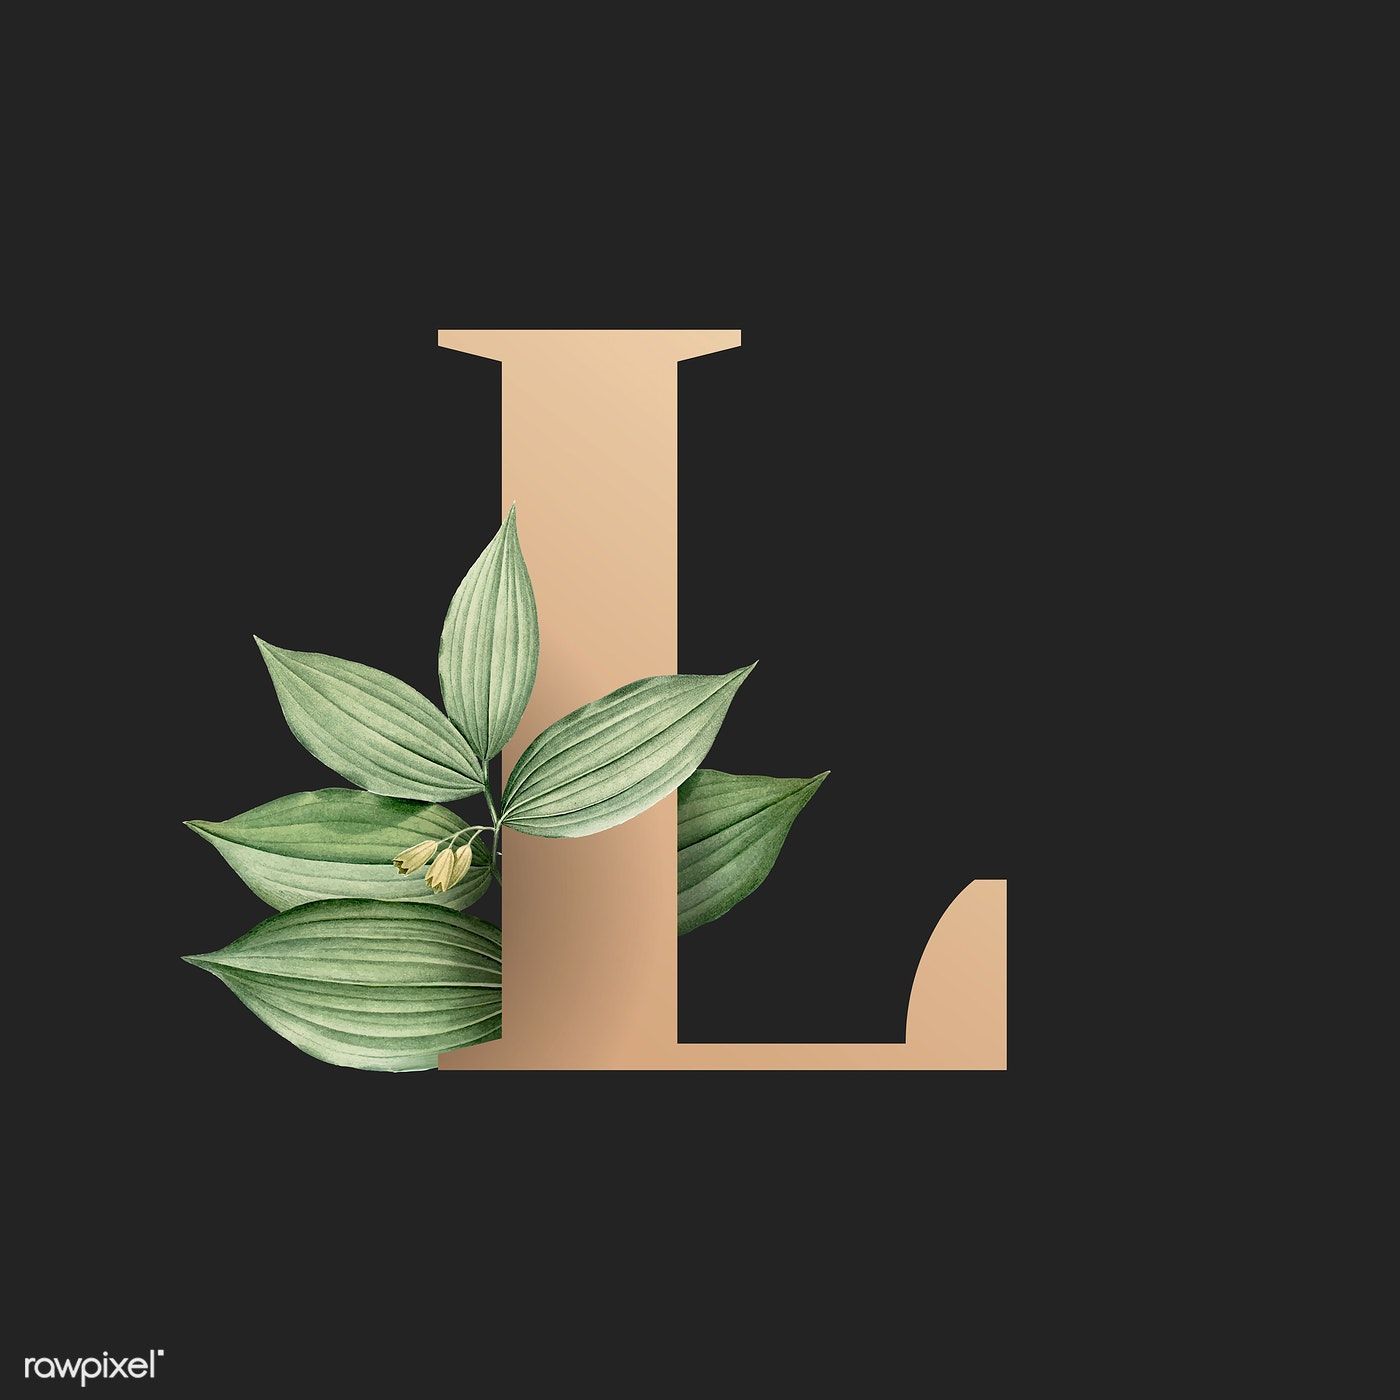 letter l wallpapers for mobile